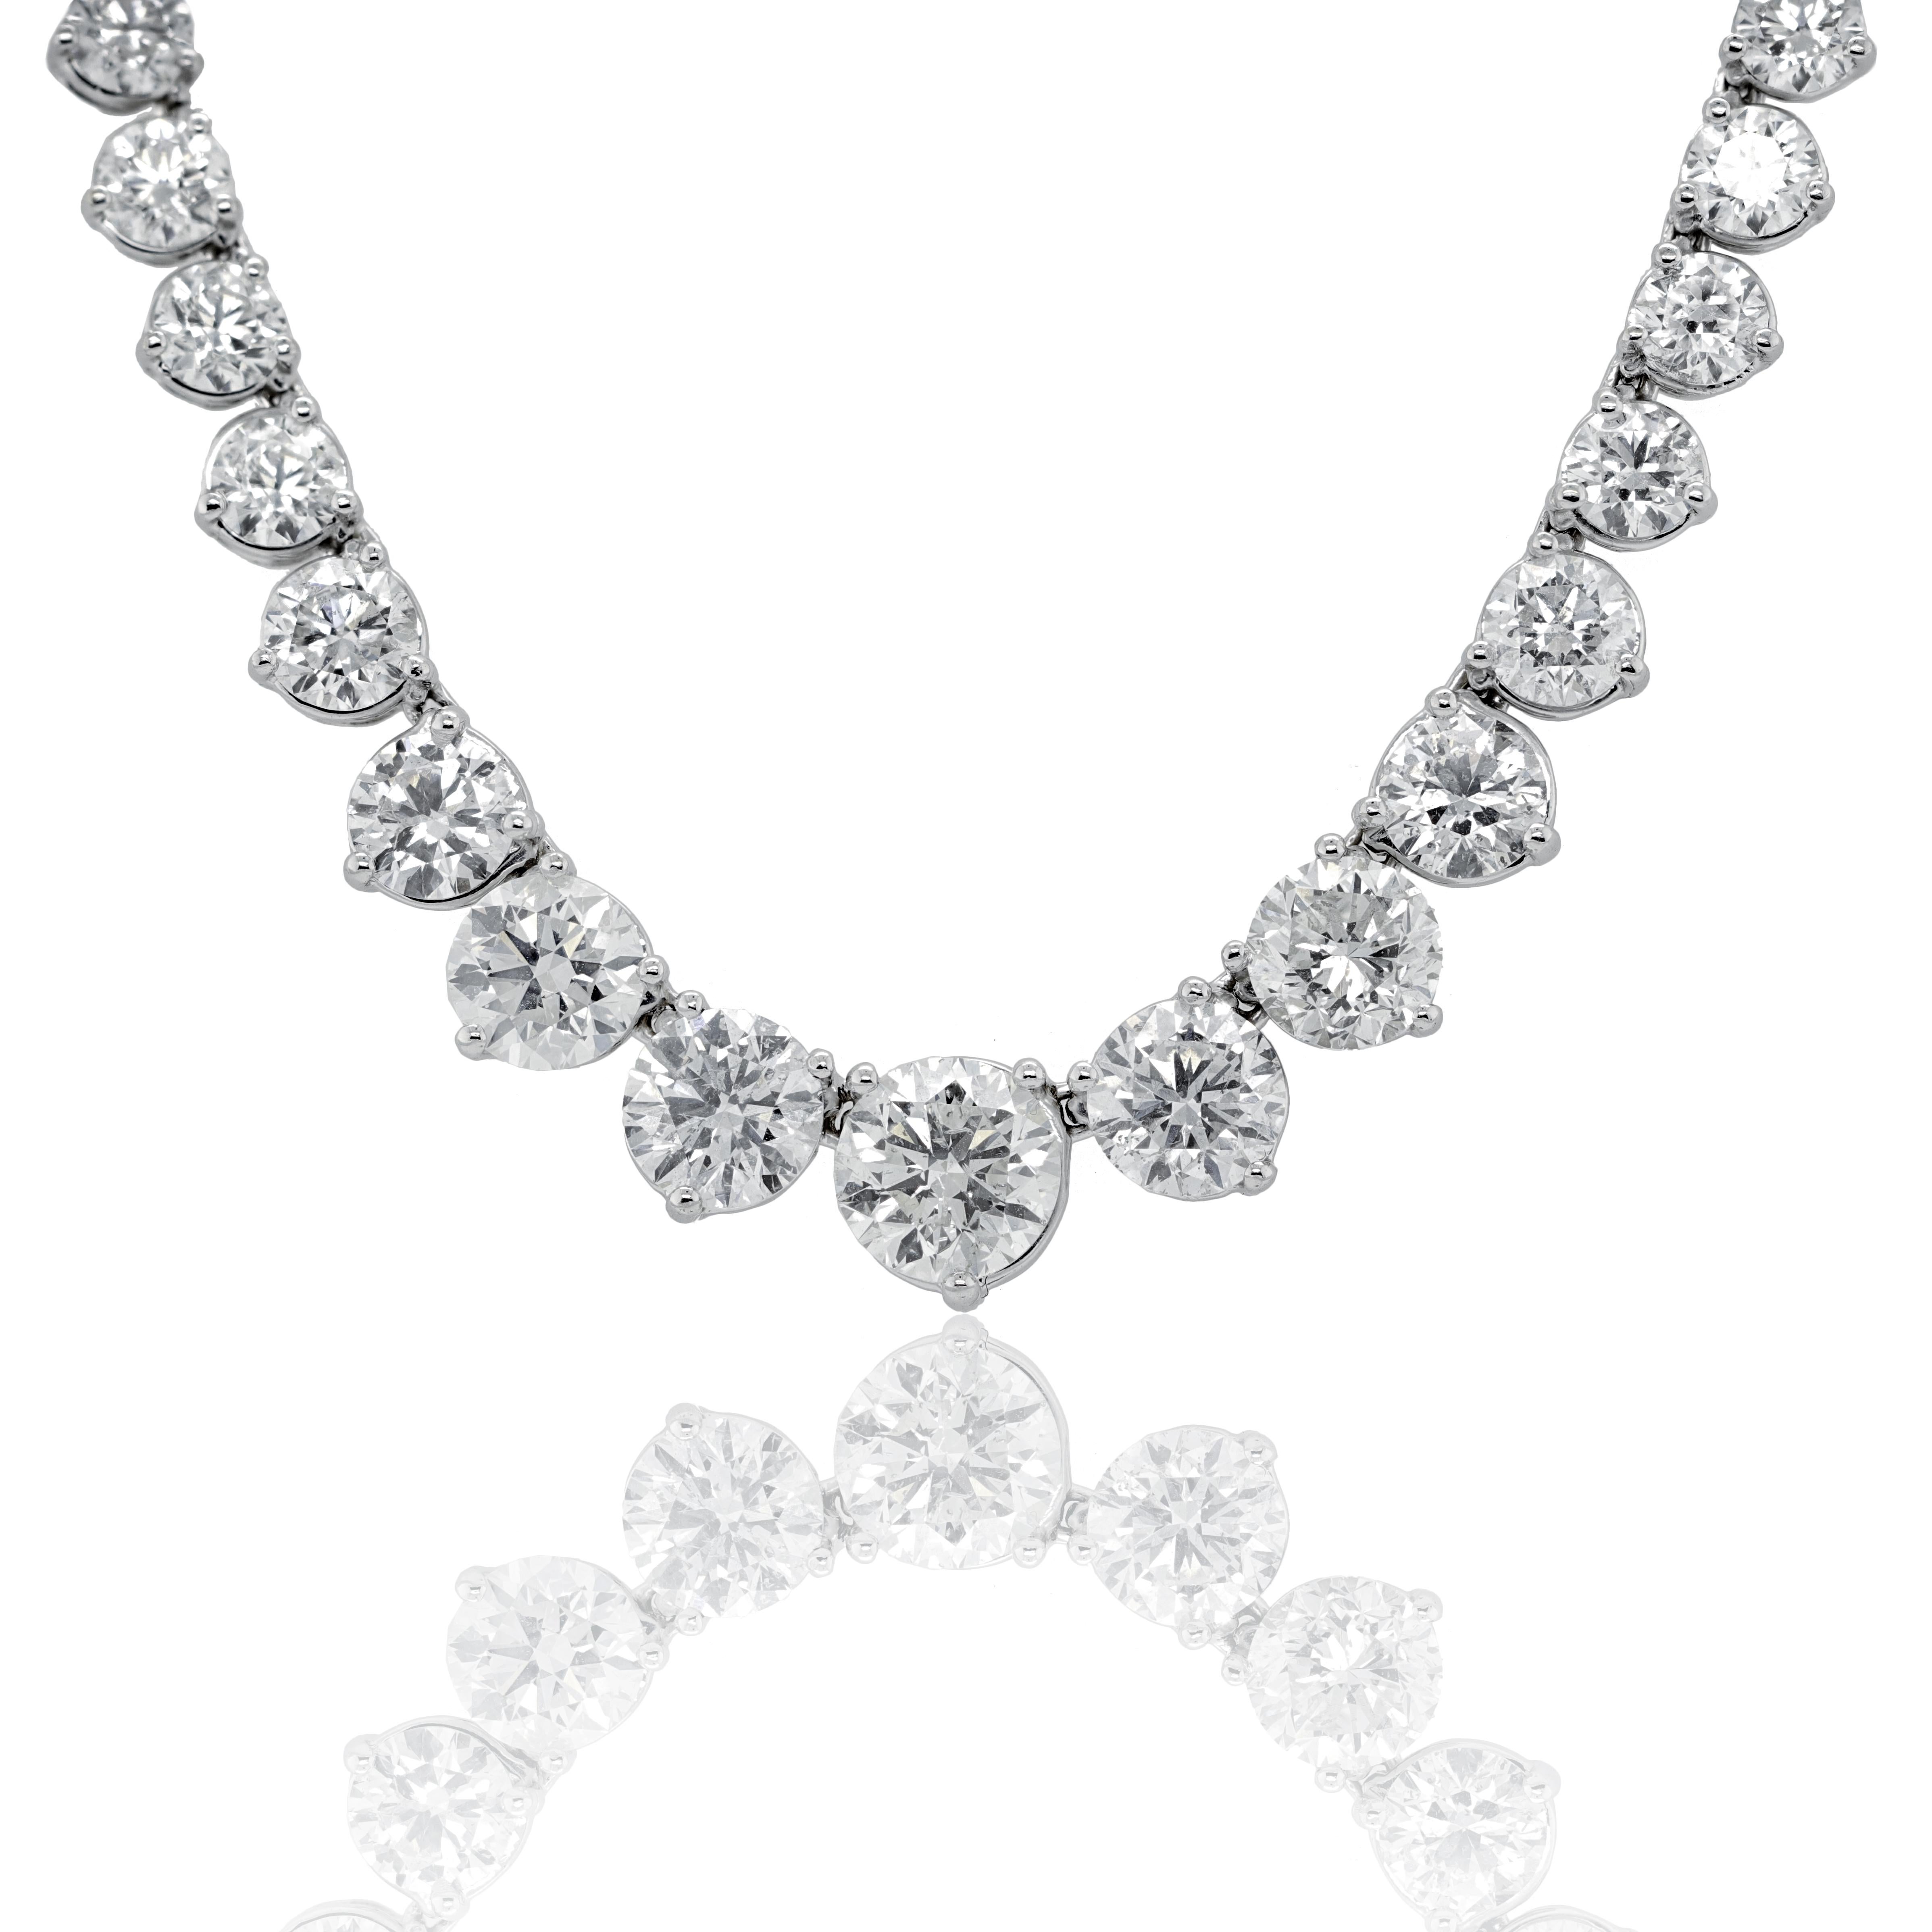 Custom 18k white gold graduated tennis necklace  20.55 cts of round brilliant diamonds 95 stones set in a 3 prong setting 0.21 each FG color SI clarity. Excellent  cut. 